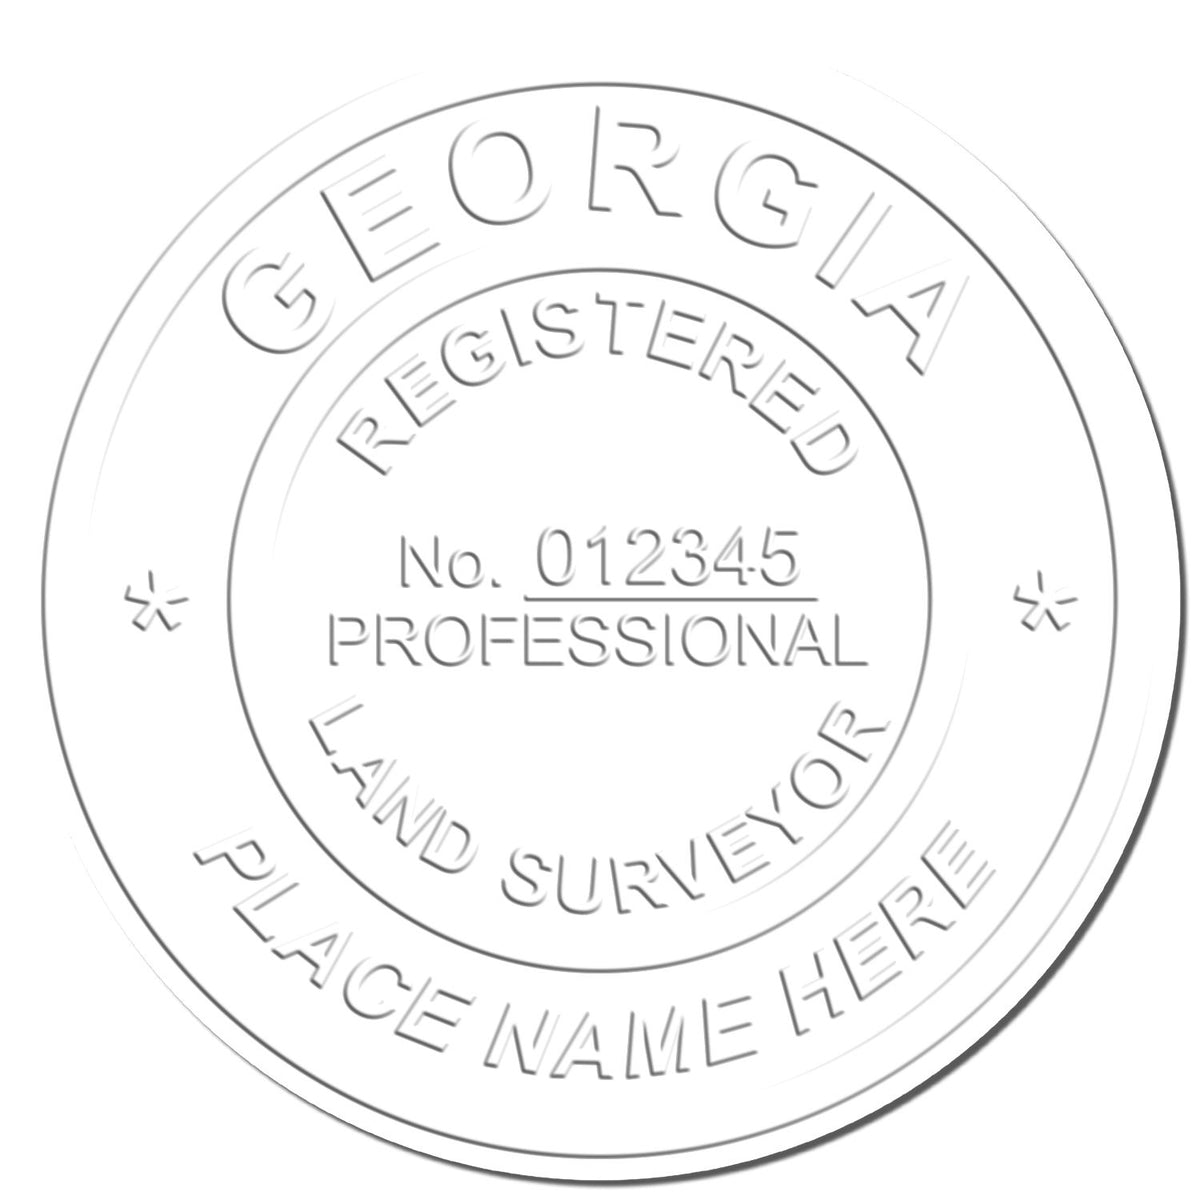 This paper is stamped with a sample imprint of the Heavy Duty Cast Iron Georgia Land Surveyor Seal Embosser, signifying its quality and reliability.